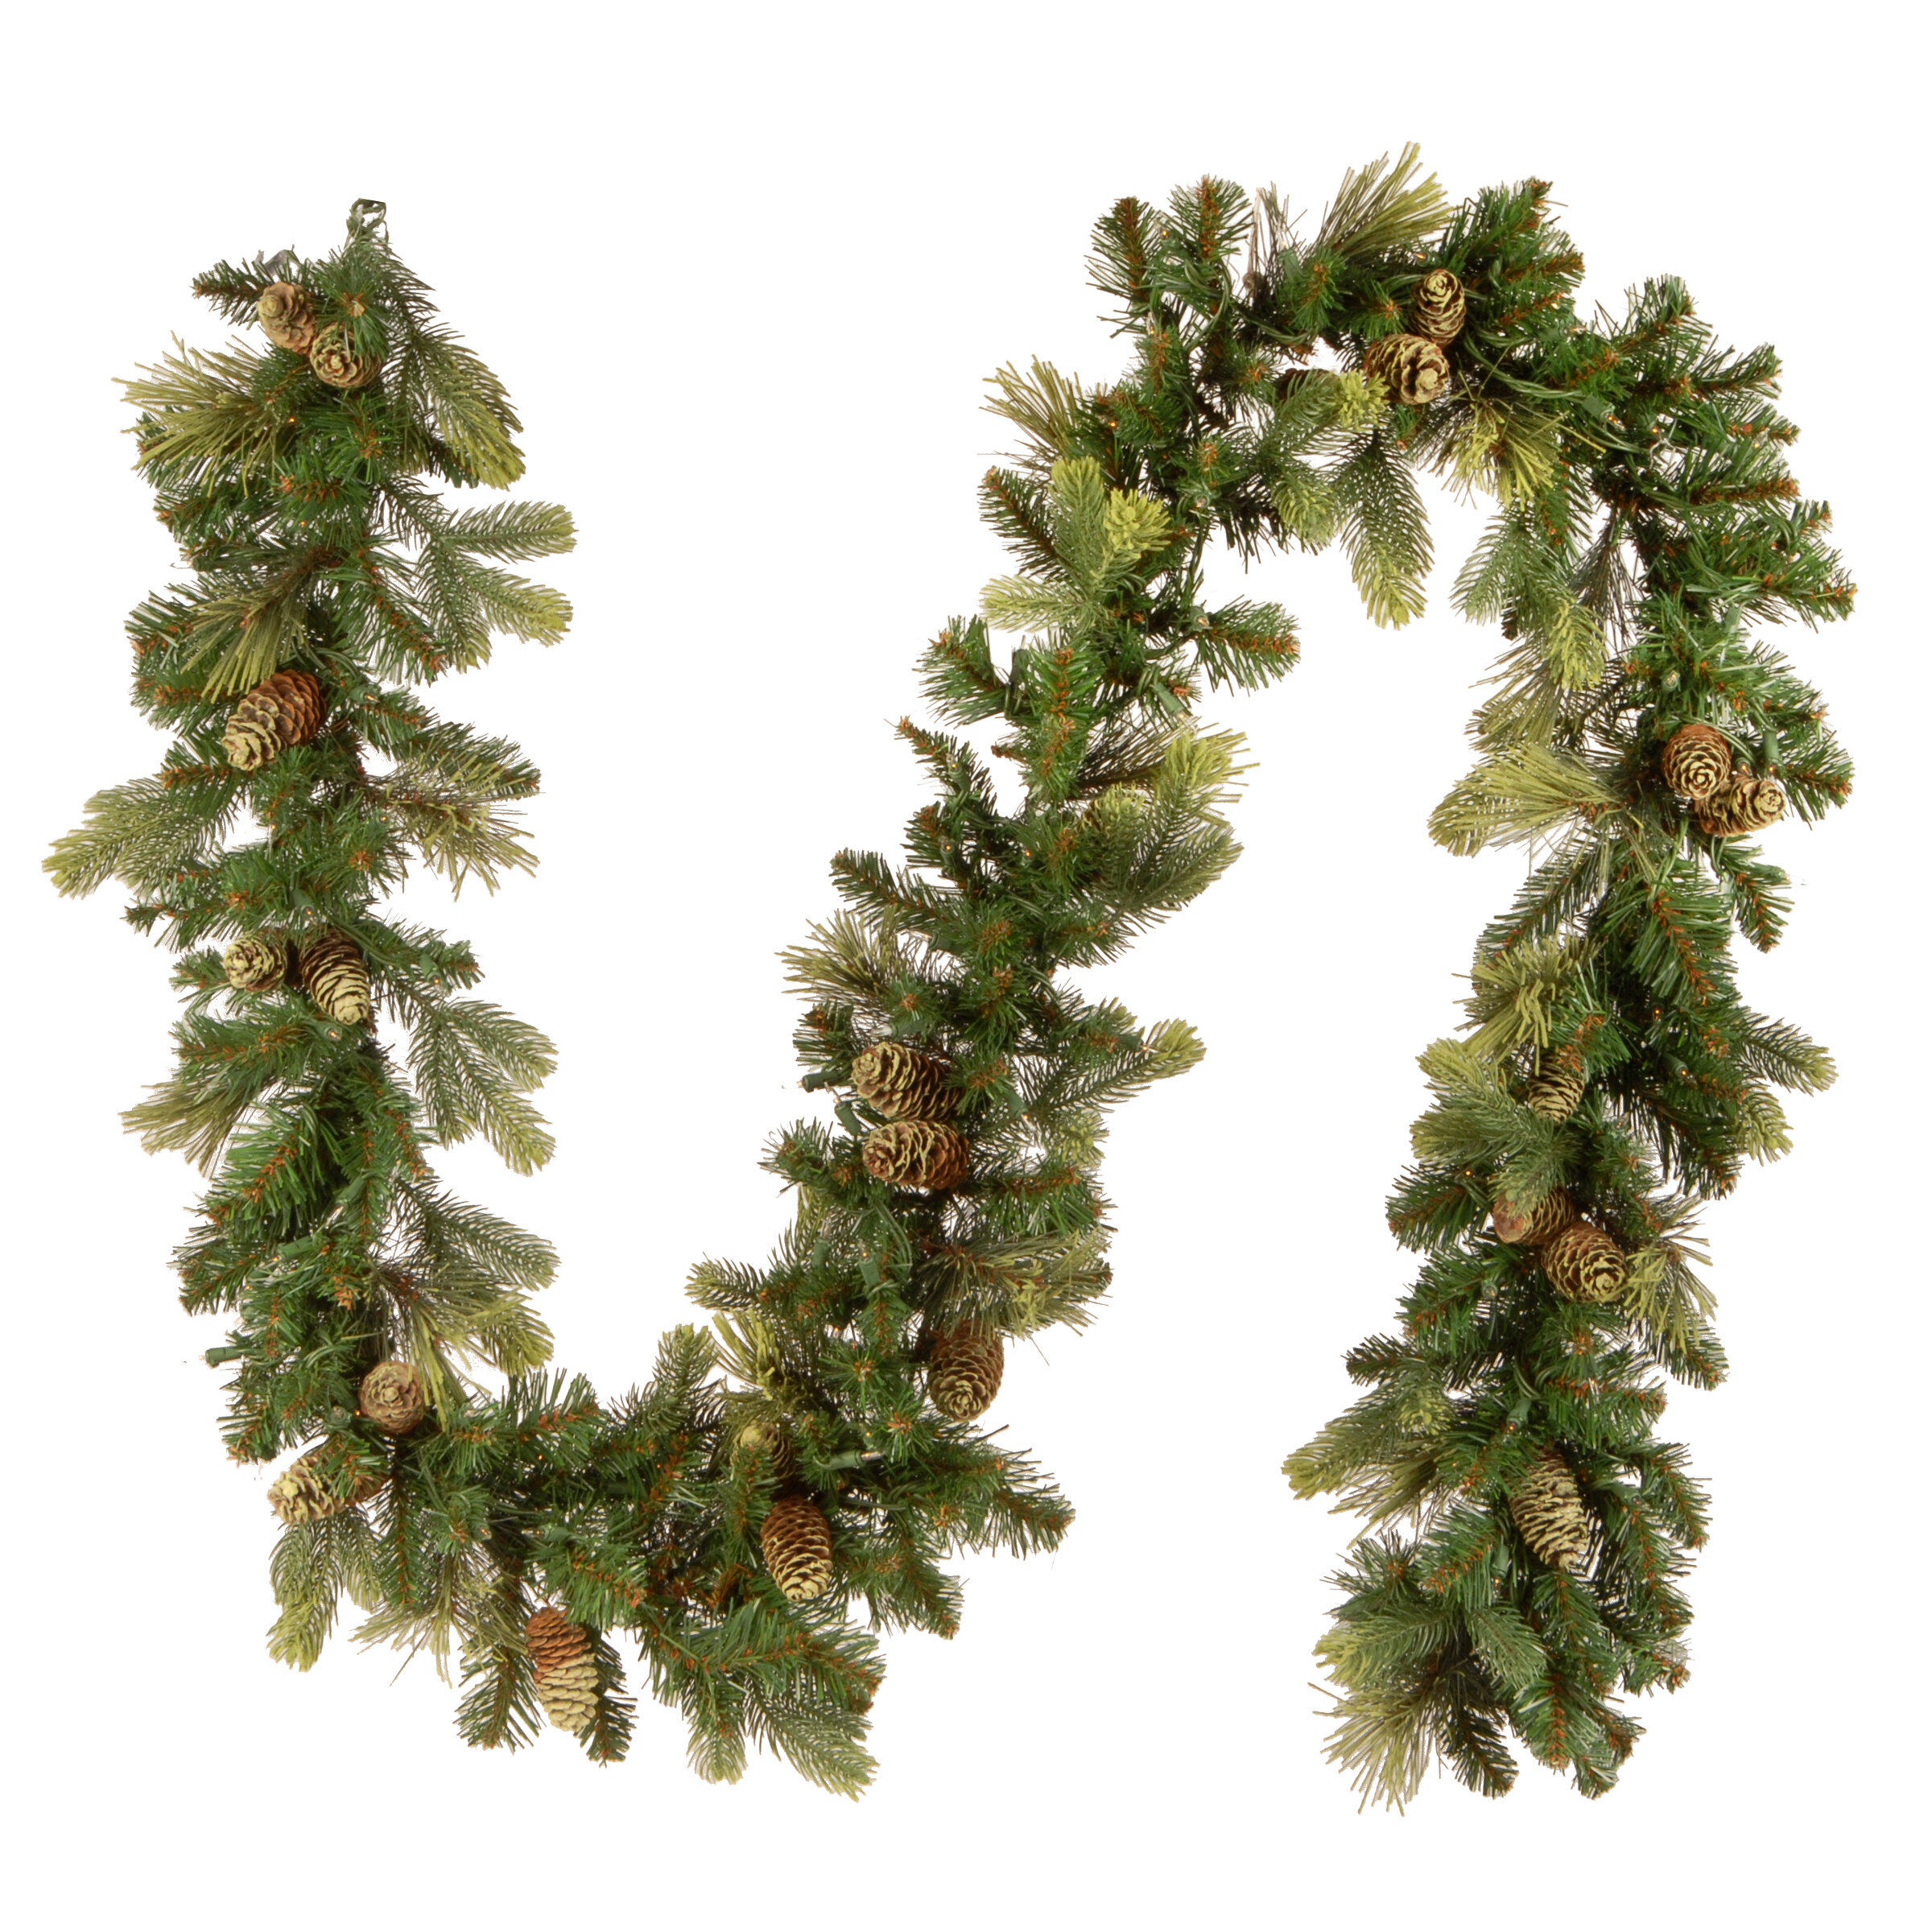 9' Glittery Faux Pine Garland with 100 Clear/White Lights